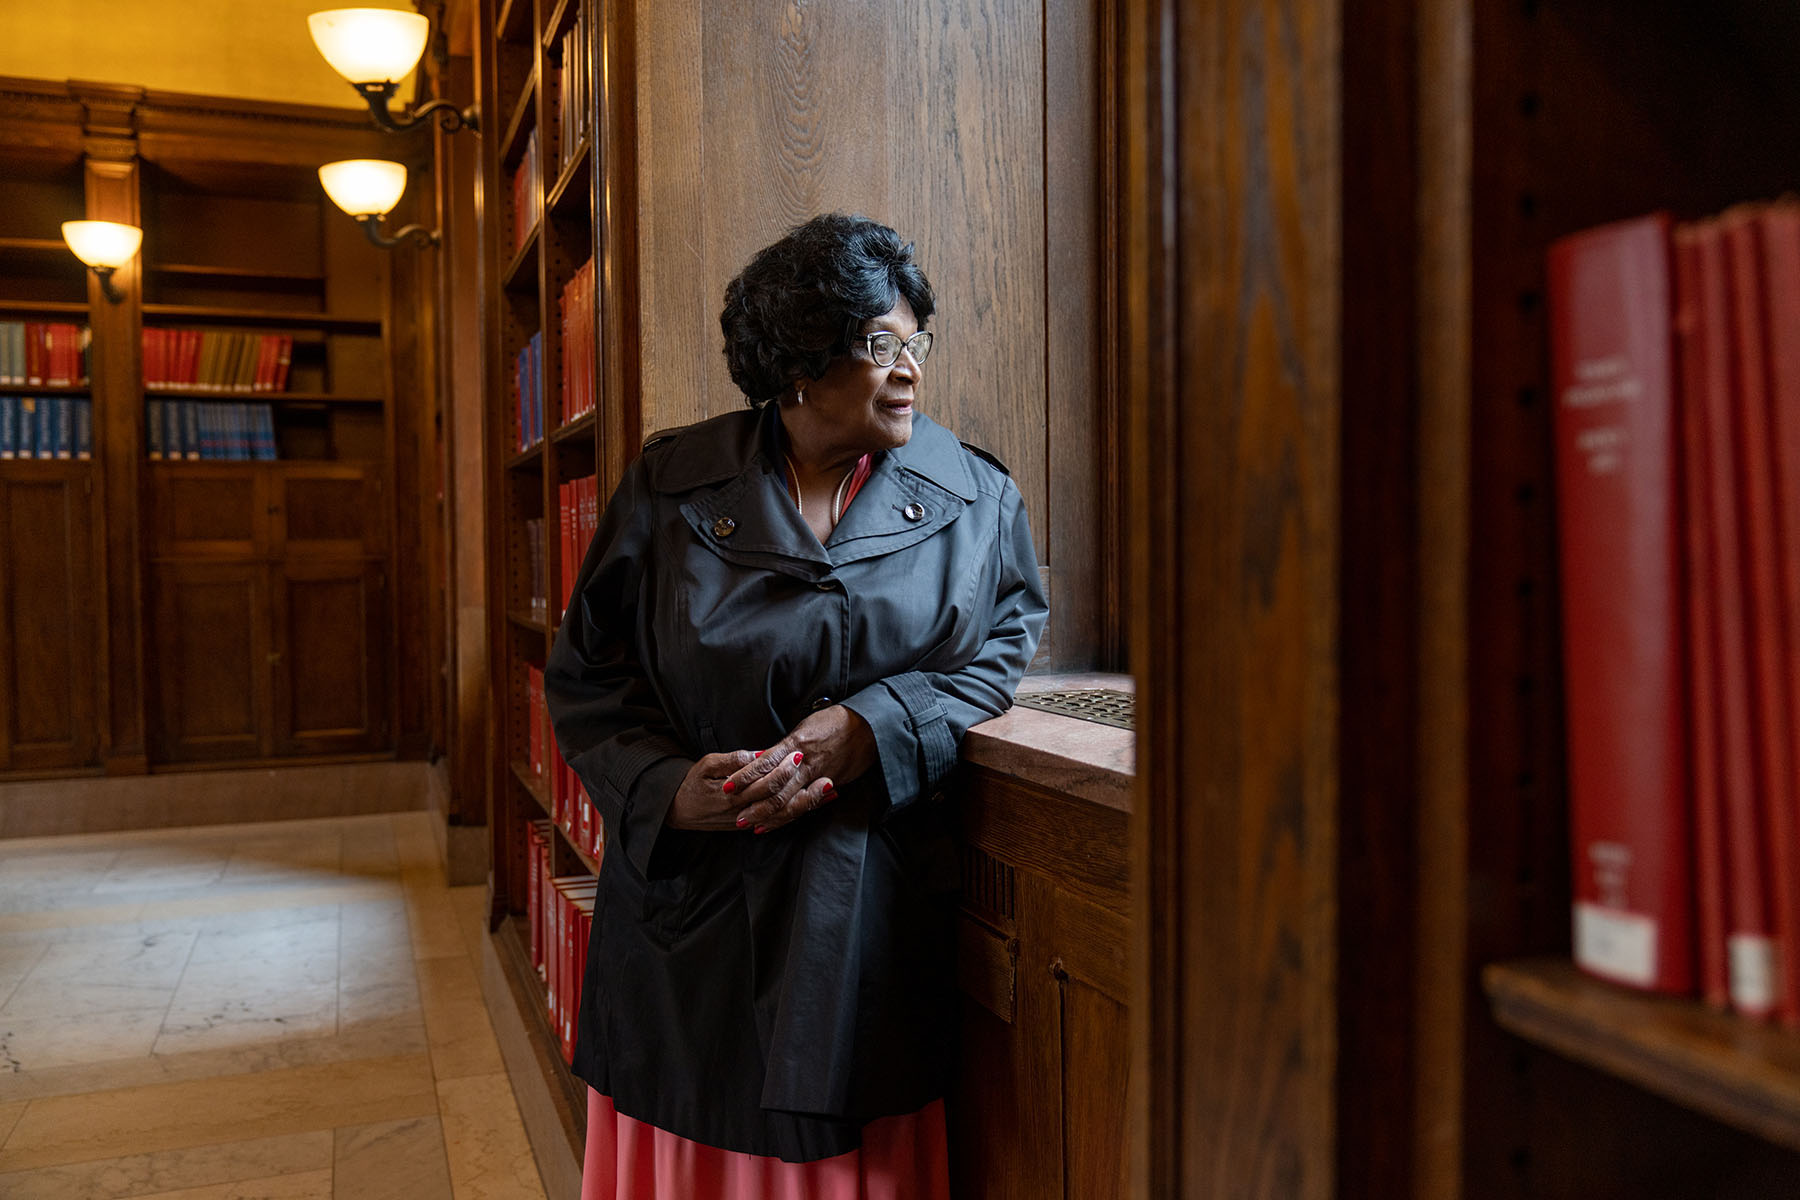 Althea Garrison looks out a window at the Boston Public Library.